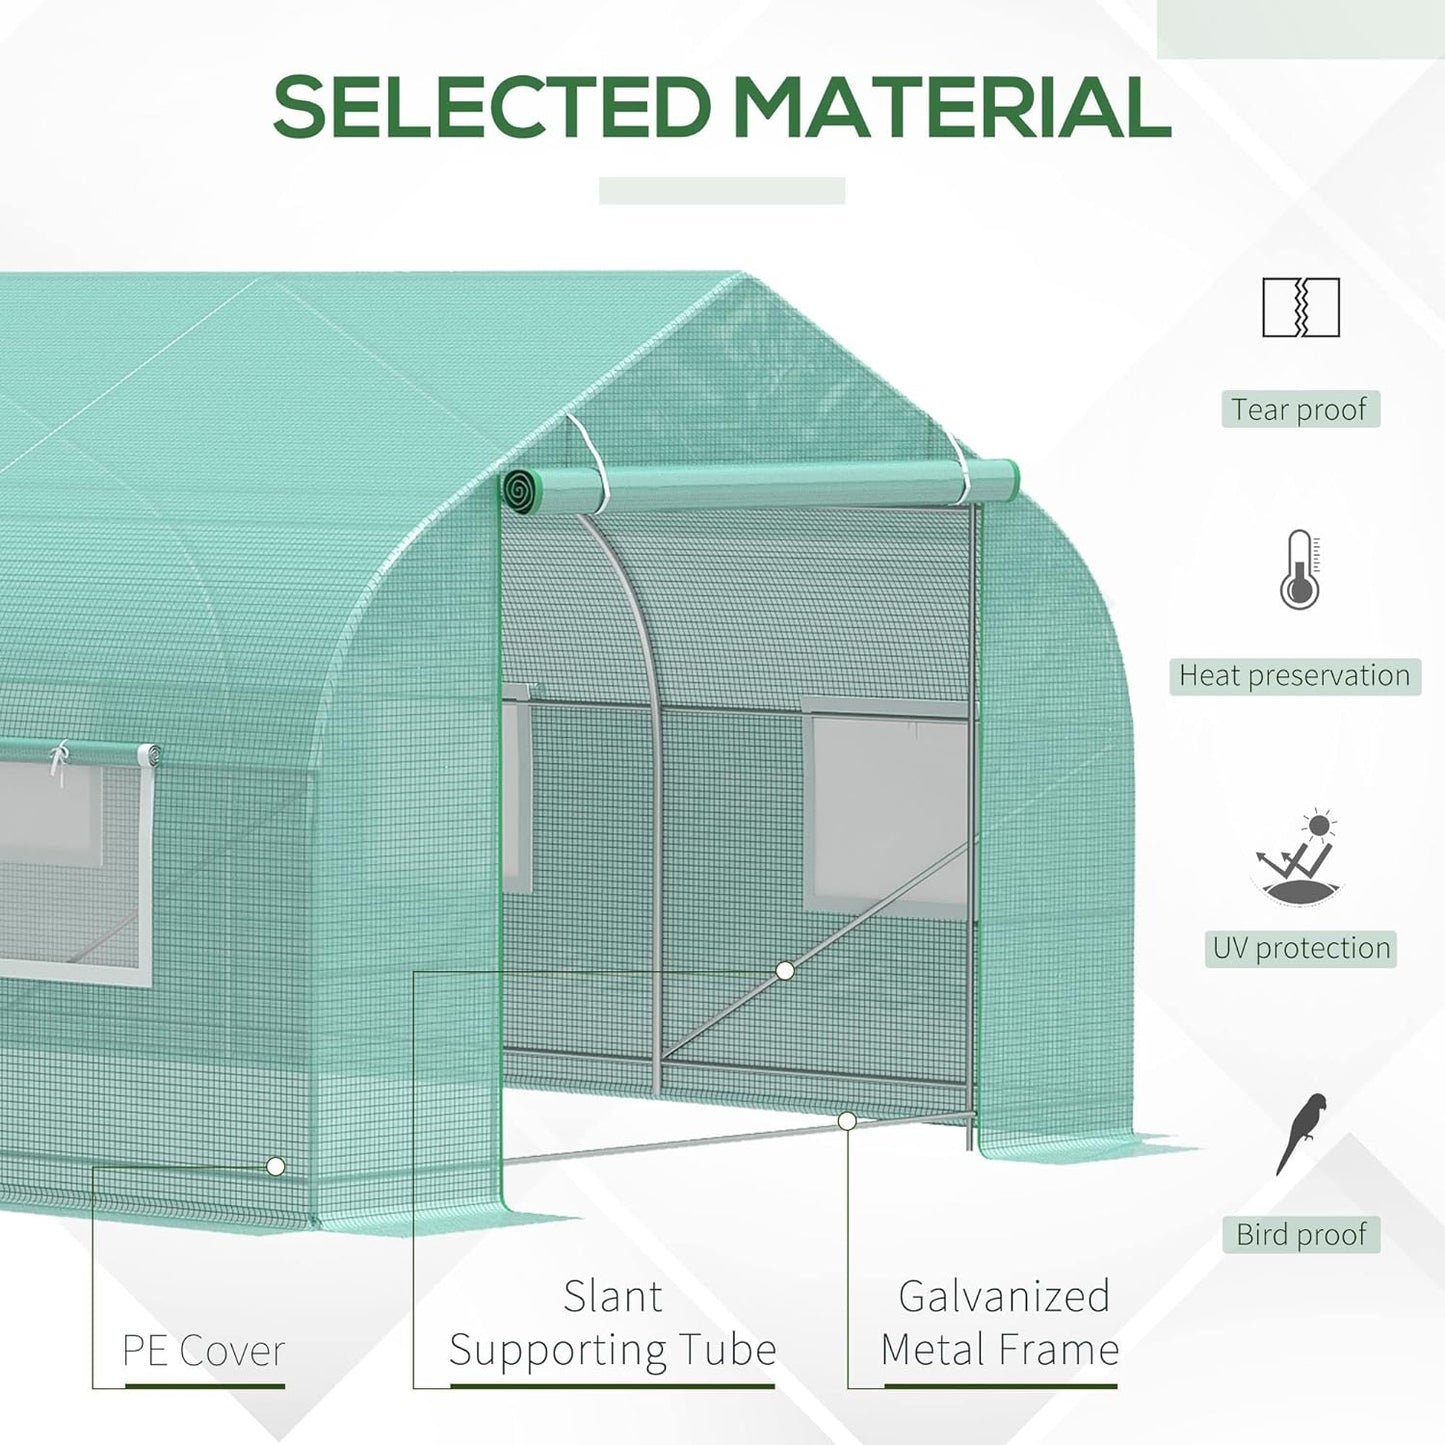 20' X 10' X 7' Outdoor Walk-In Greenhouse, Tunnel Green House with Roll-Up Windows, Zippered Door, PE Cover, Heavy Duty Steel Frame, Green - Design By Technique